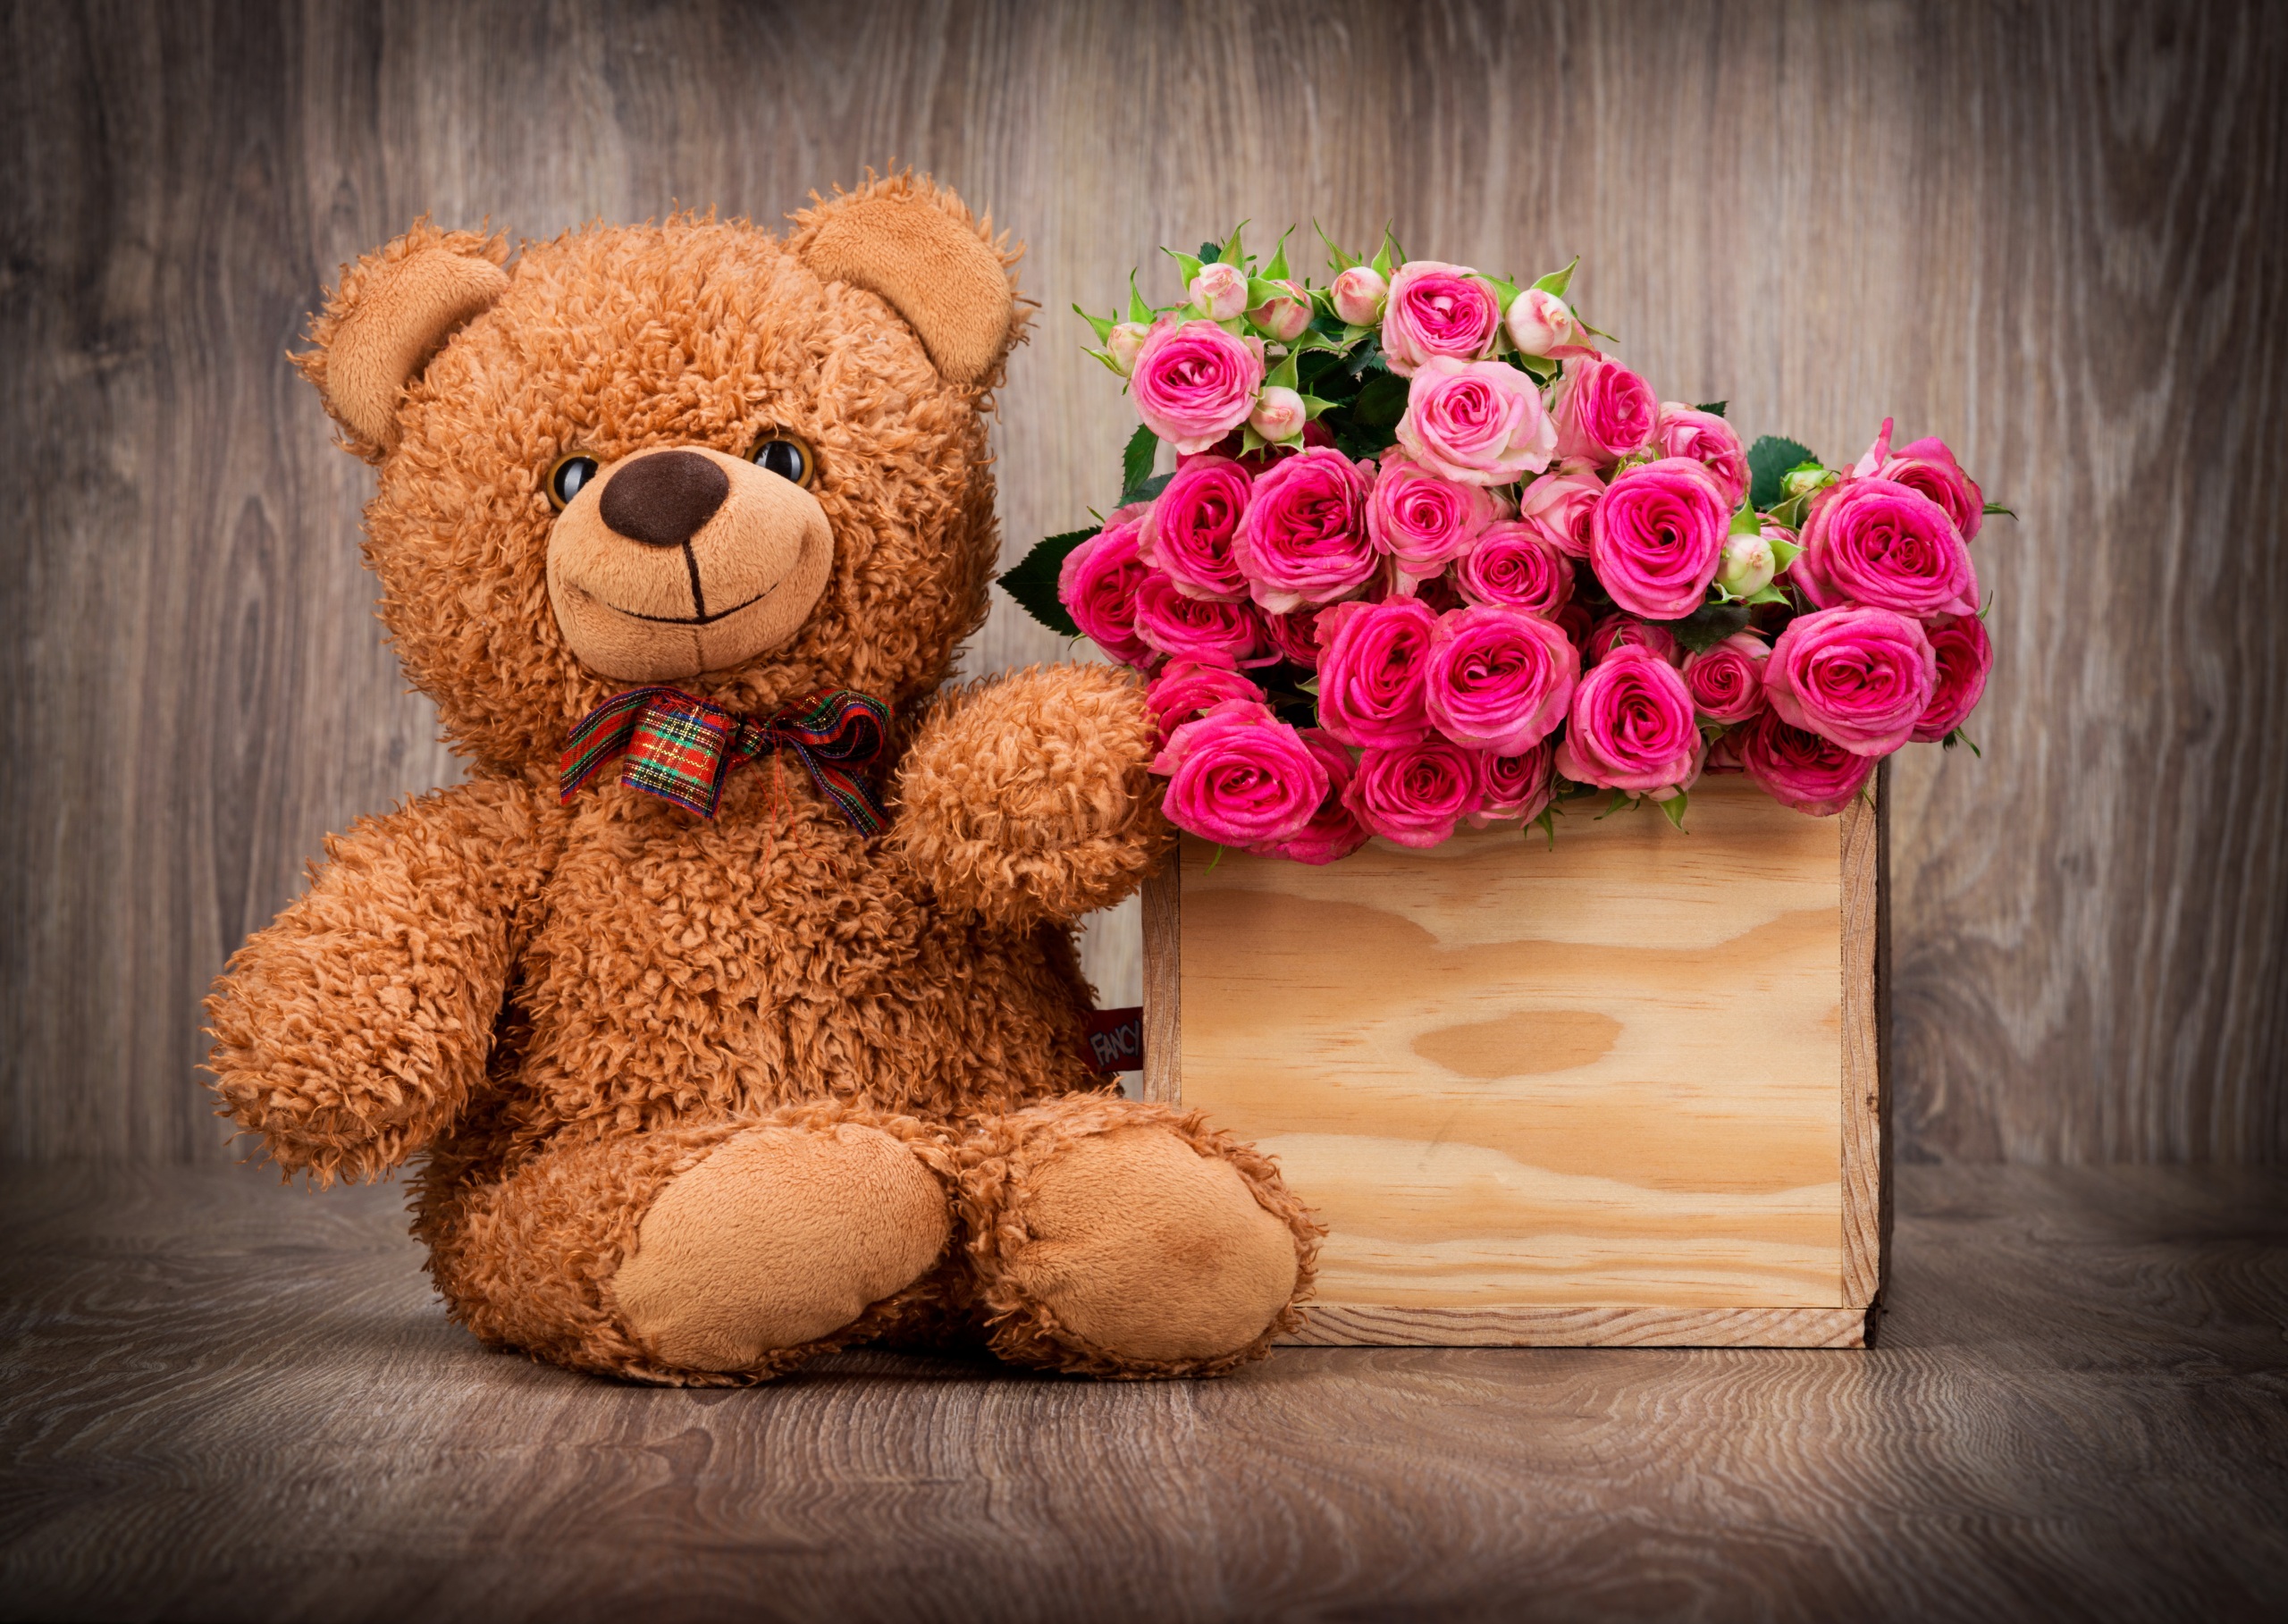 Free download Cute Teddy Bear Wallpaper with Pink Roses in Box HD Wallpaper for [2560x1817] for your Desktop, Mobile & Tablet. Explore Cute Teddy Bears Wallpaper. Teddy Bear Wallpaper